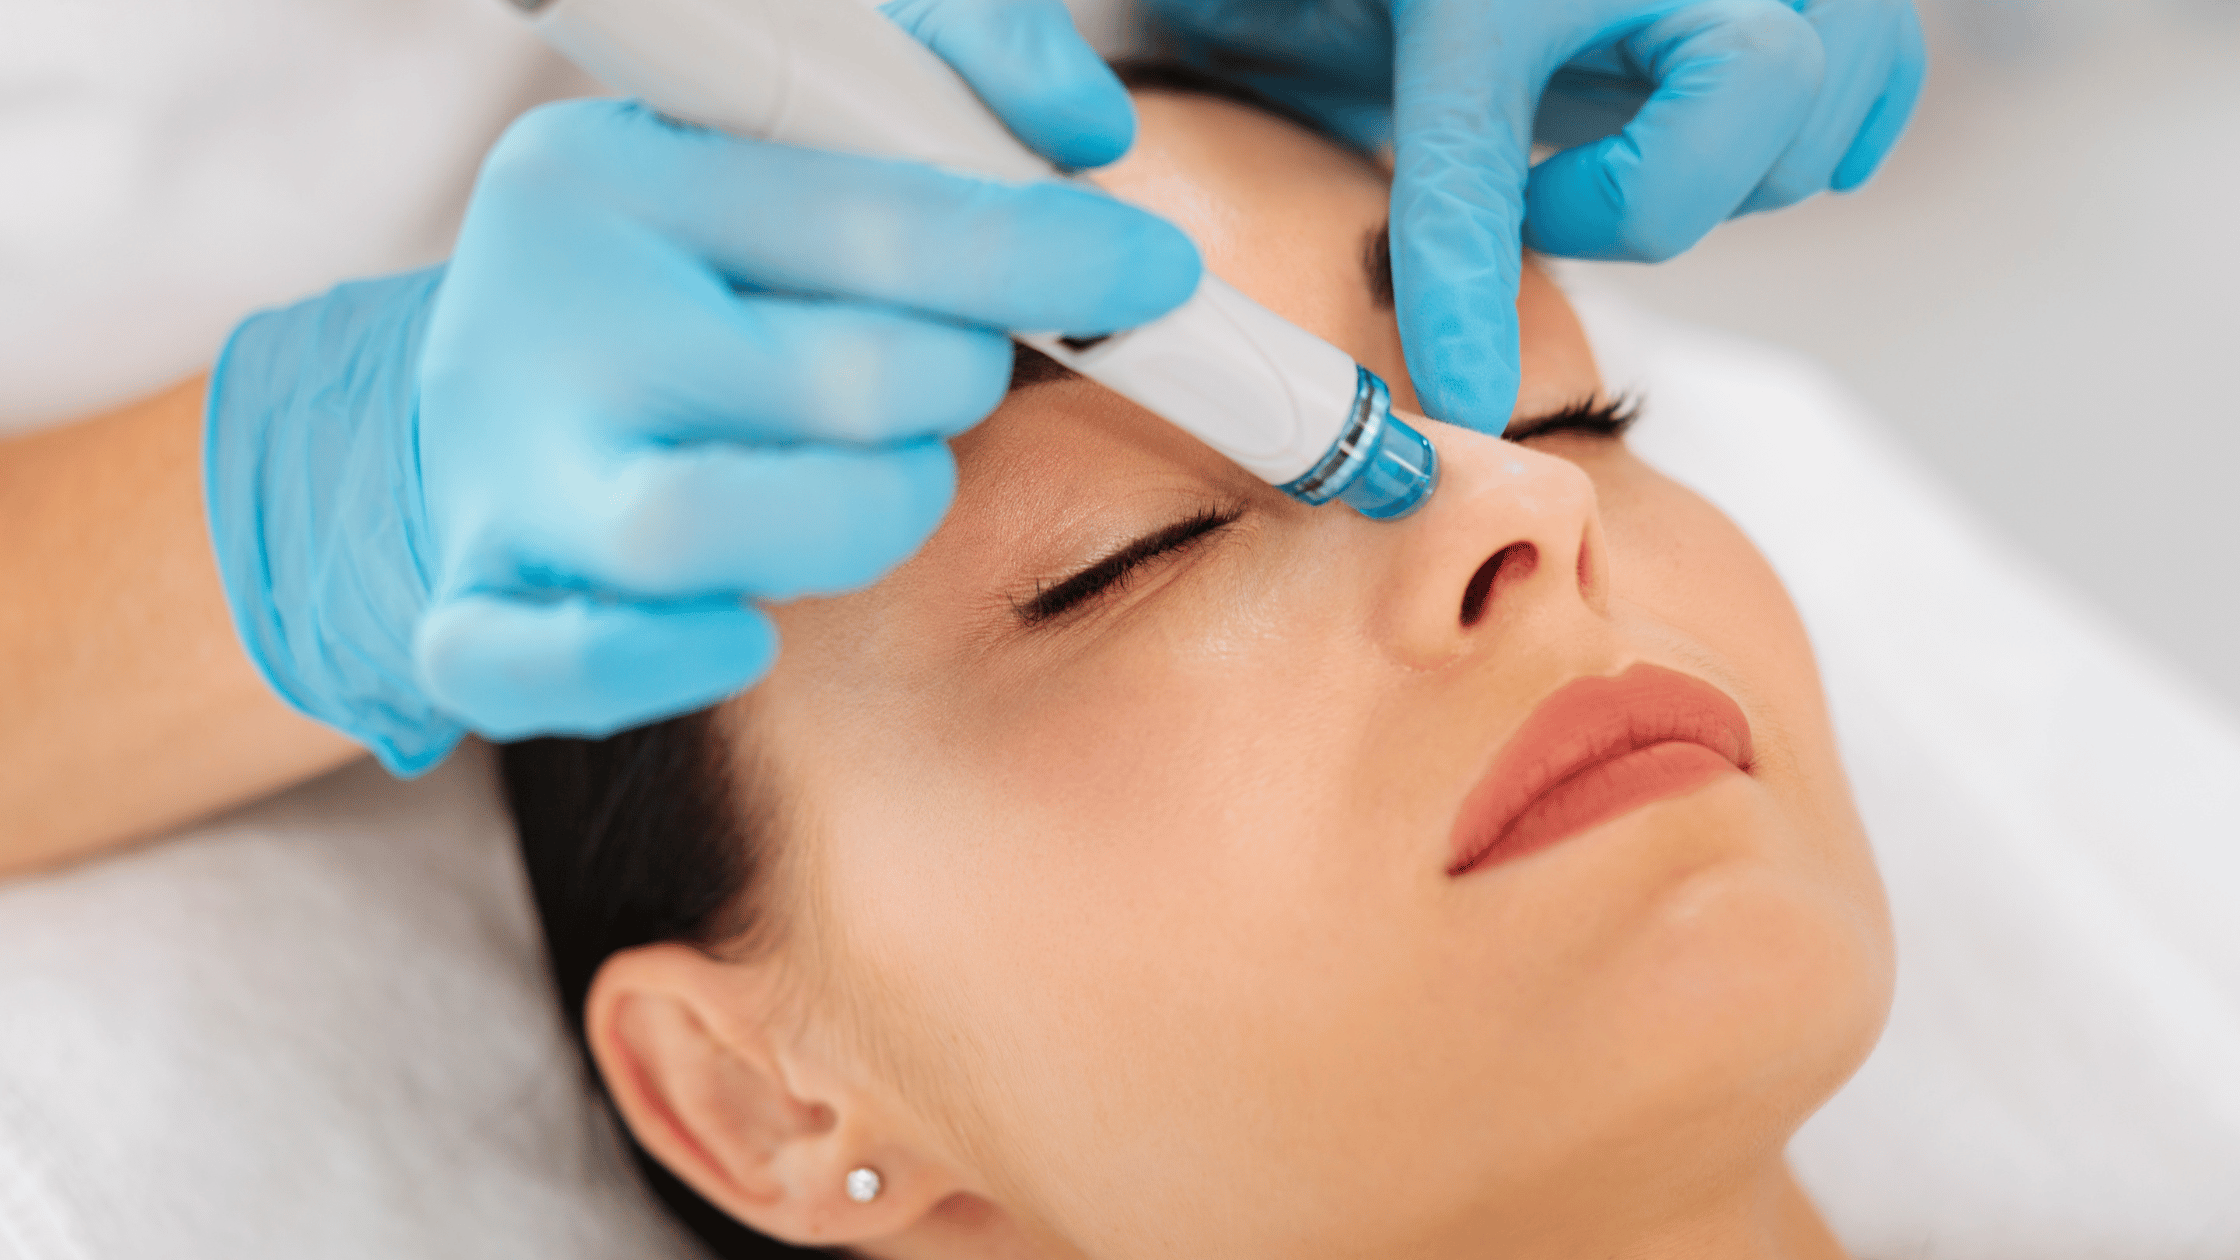 a woman receives a medical facial. The image shows a close up of the facial device on the womans face. She is relaxed and serene.